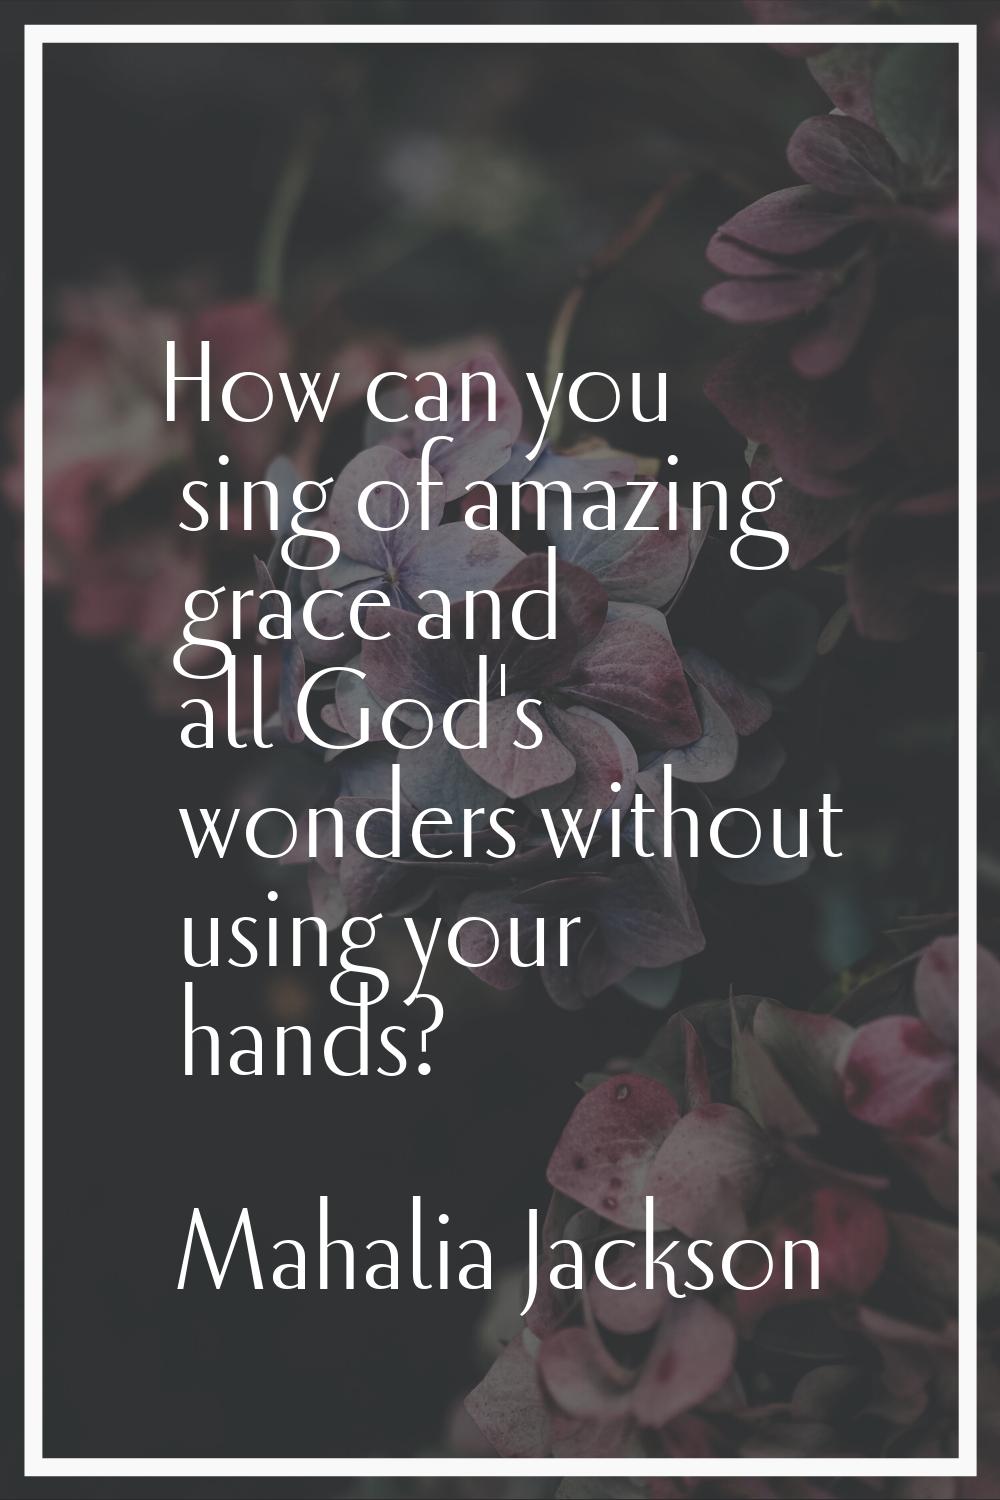 How can you sing of amazing grace and all God's wonders without using your hands?